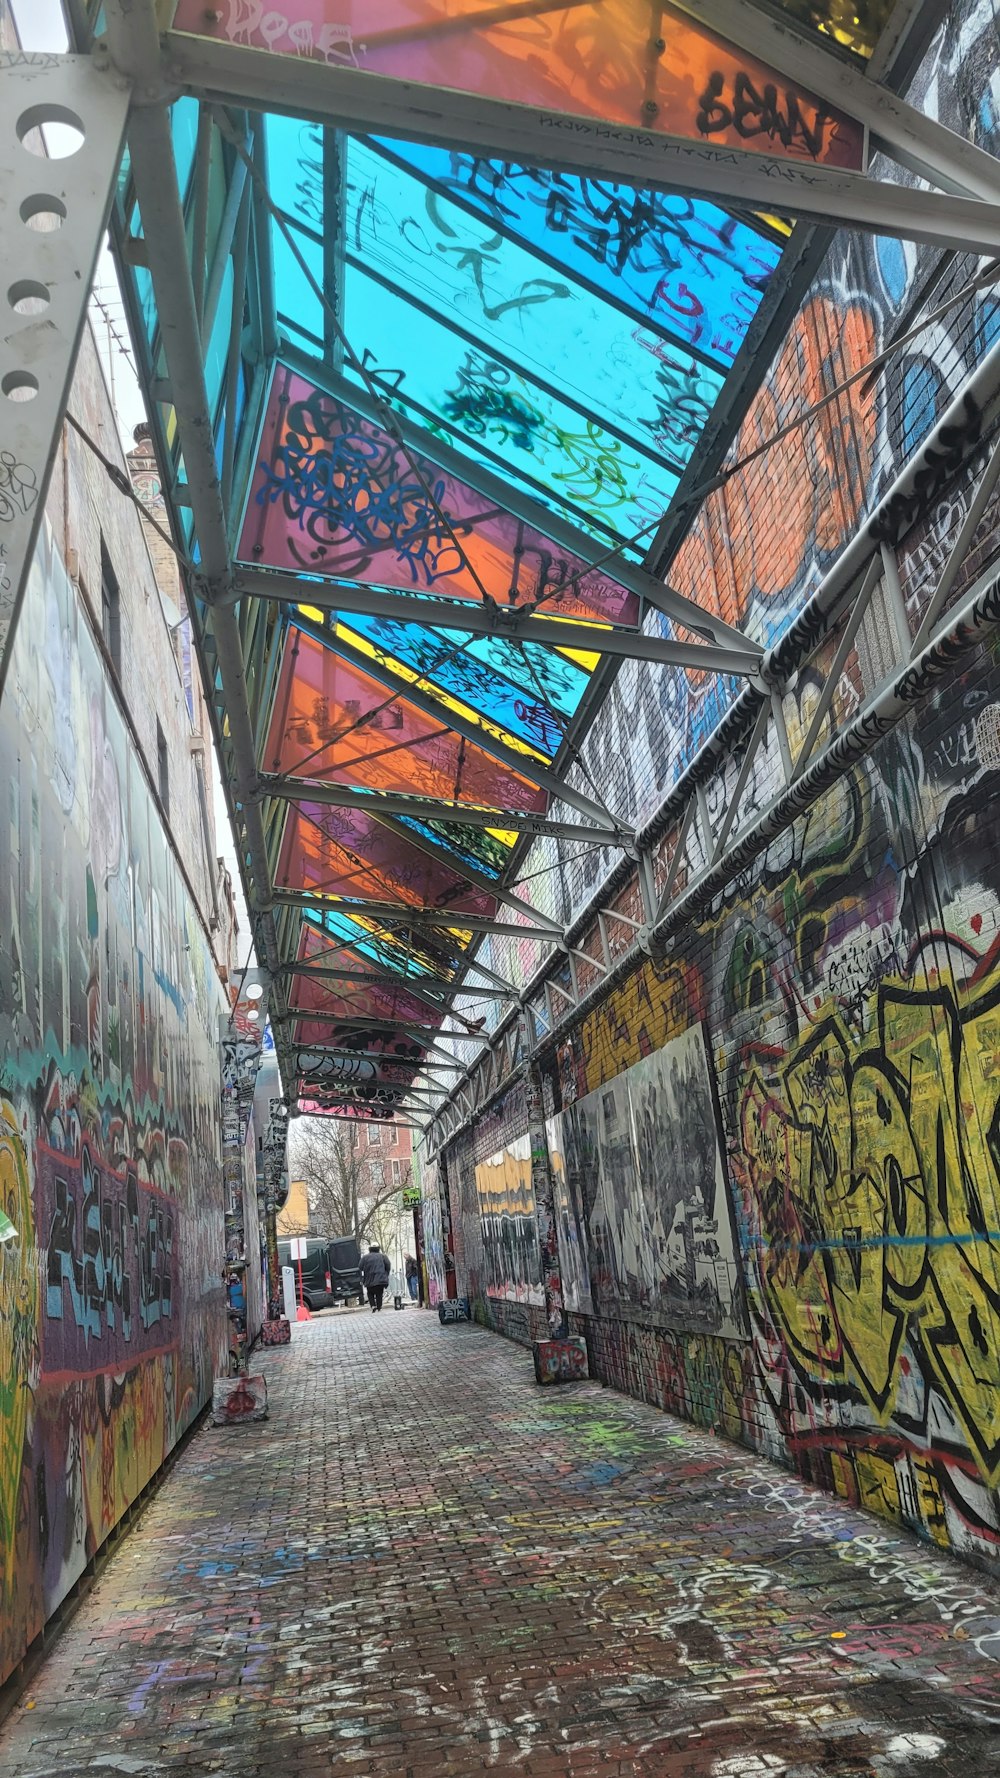 a walkway with graffiti on the walls and a skylight